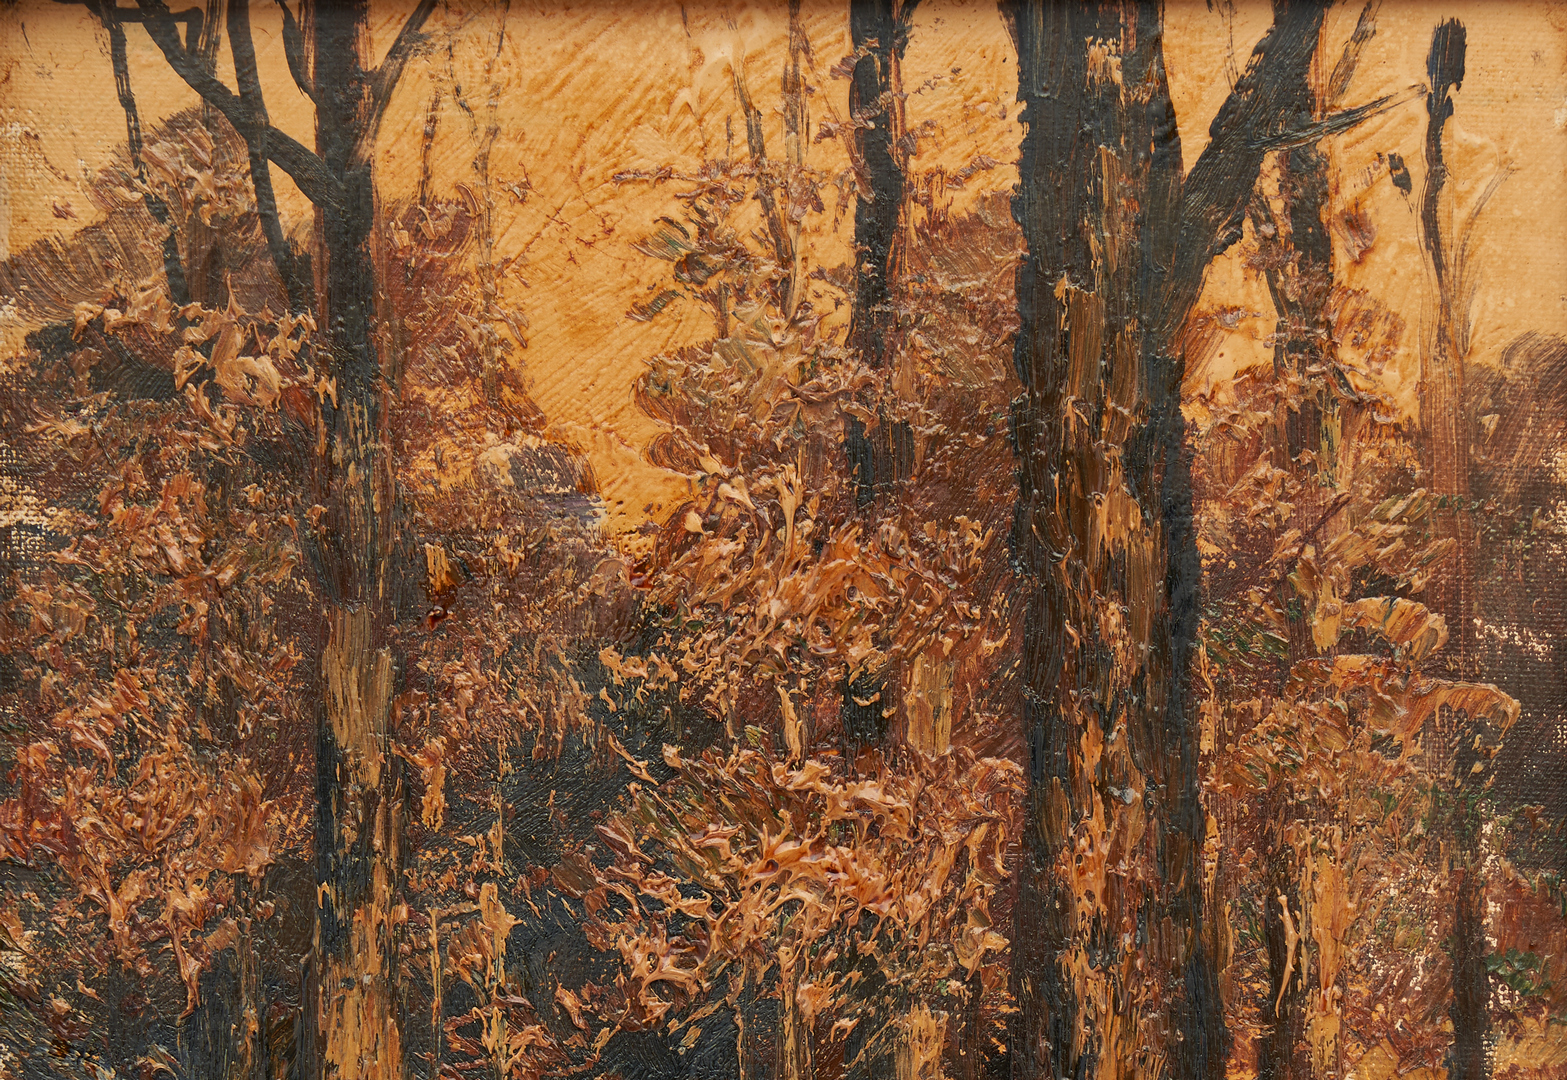 Lot 808: Two (2) William Eyden O/B, Autumn Landscape Paintings